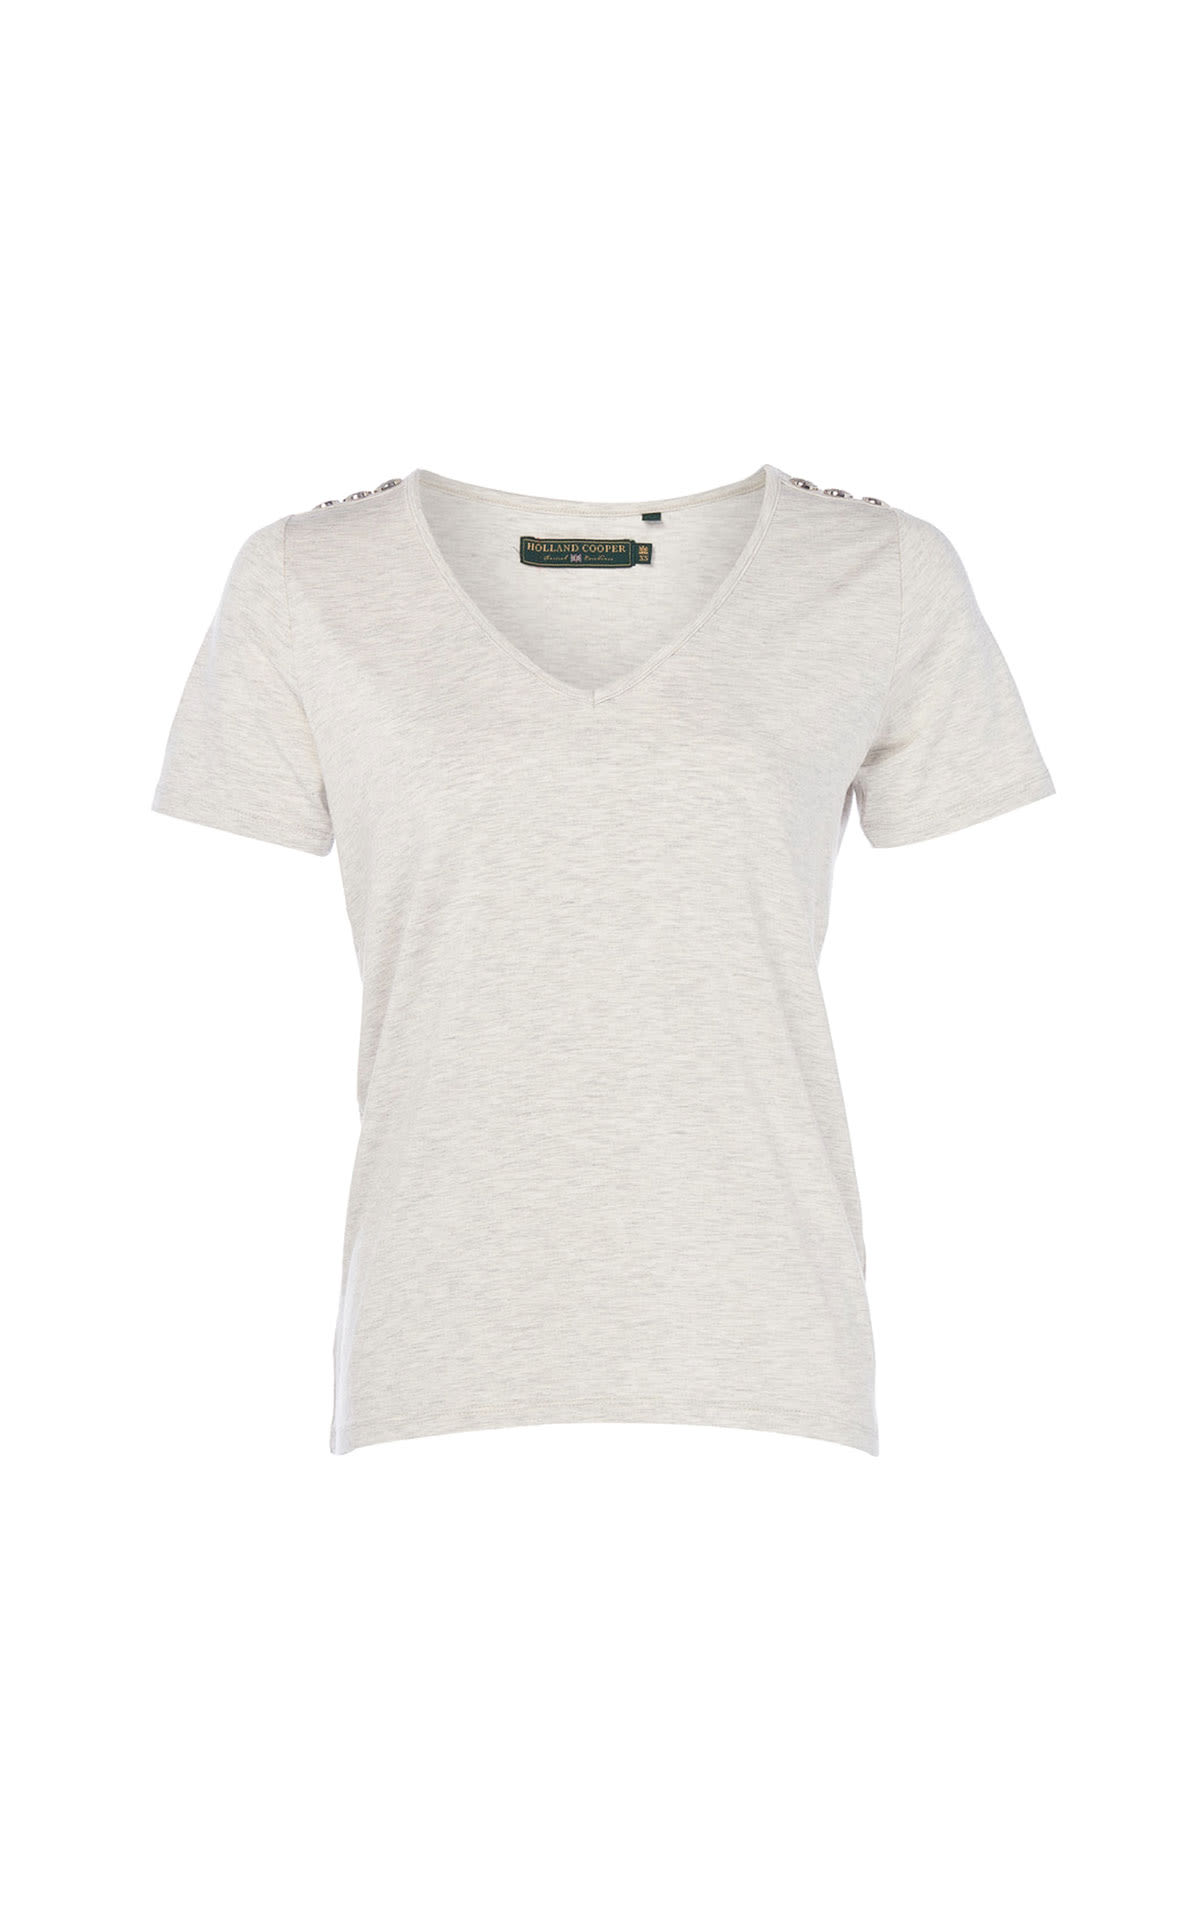 Holland Cooper Relax fit vee neck tee from Bicester Village